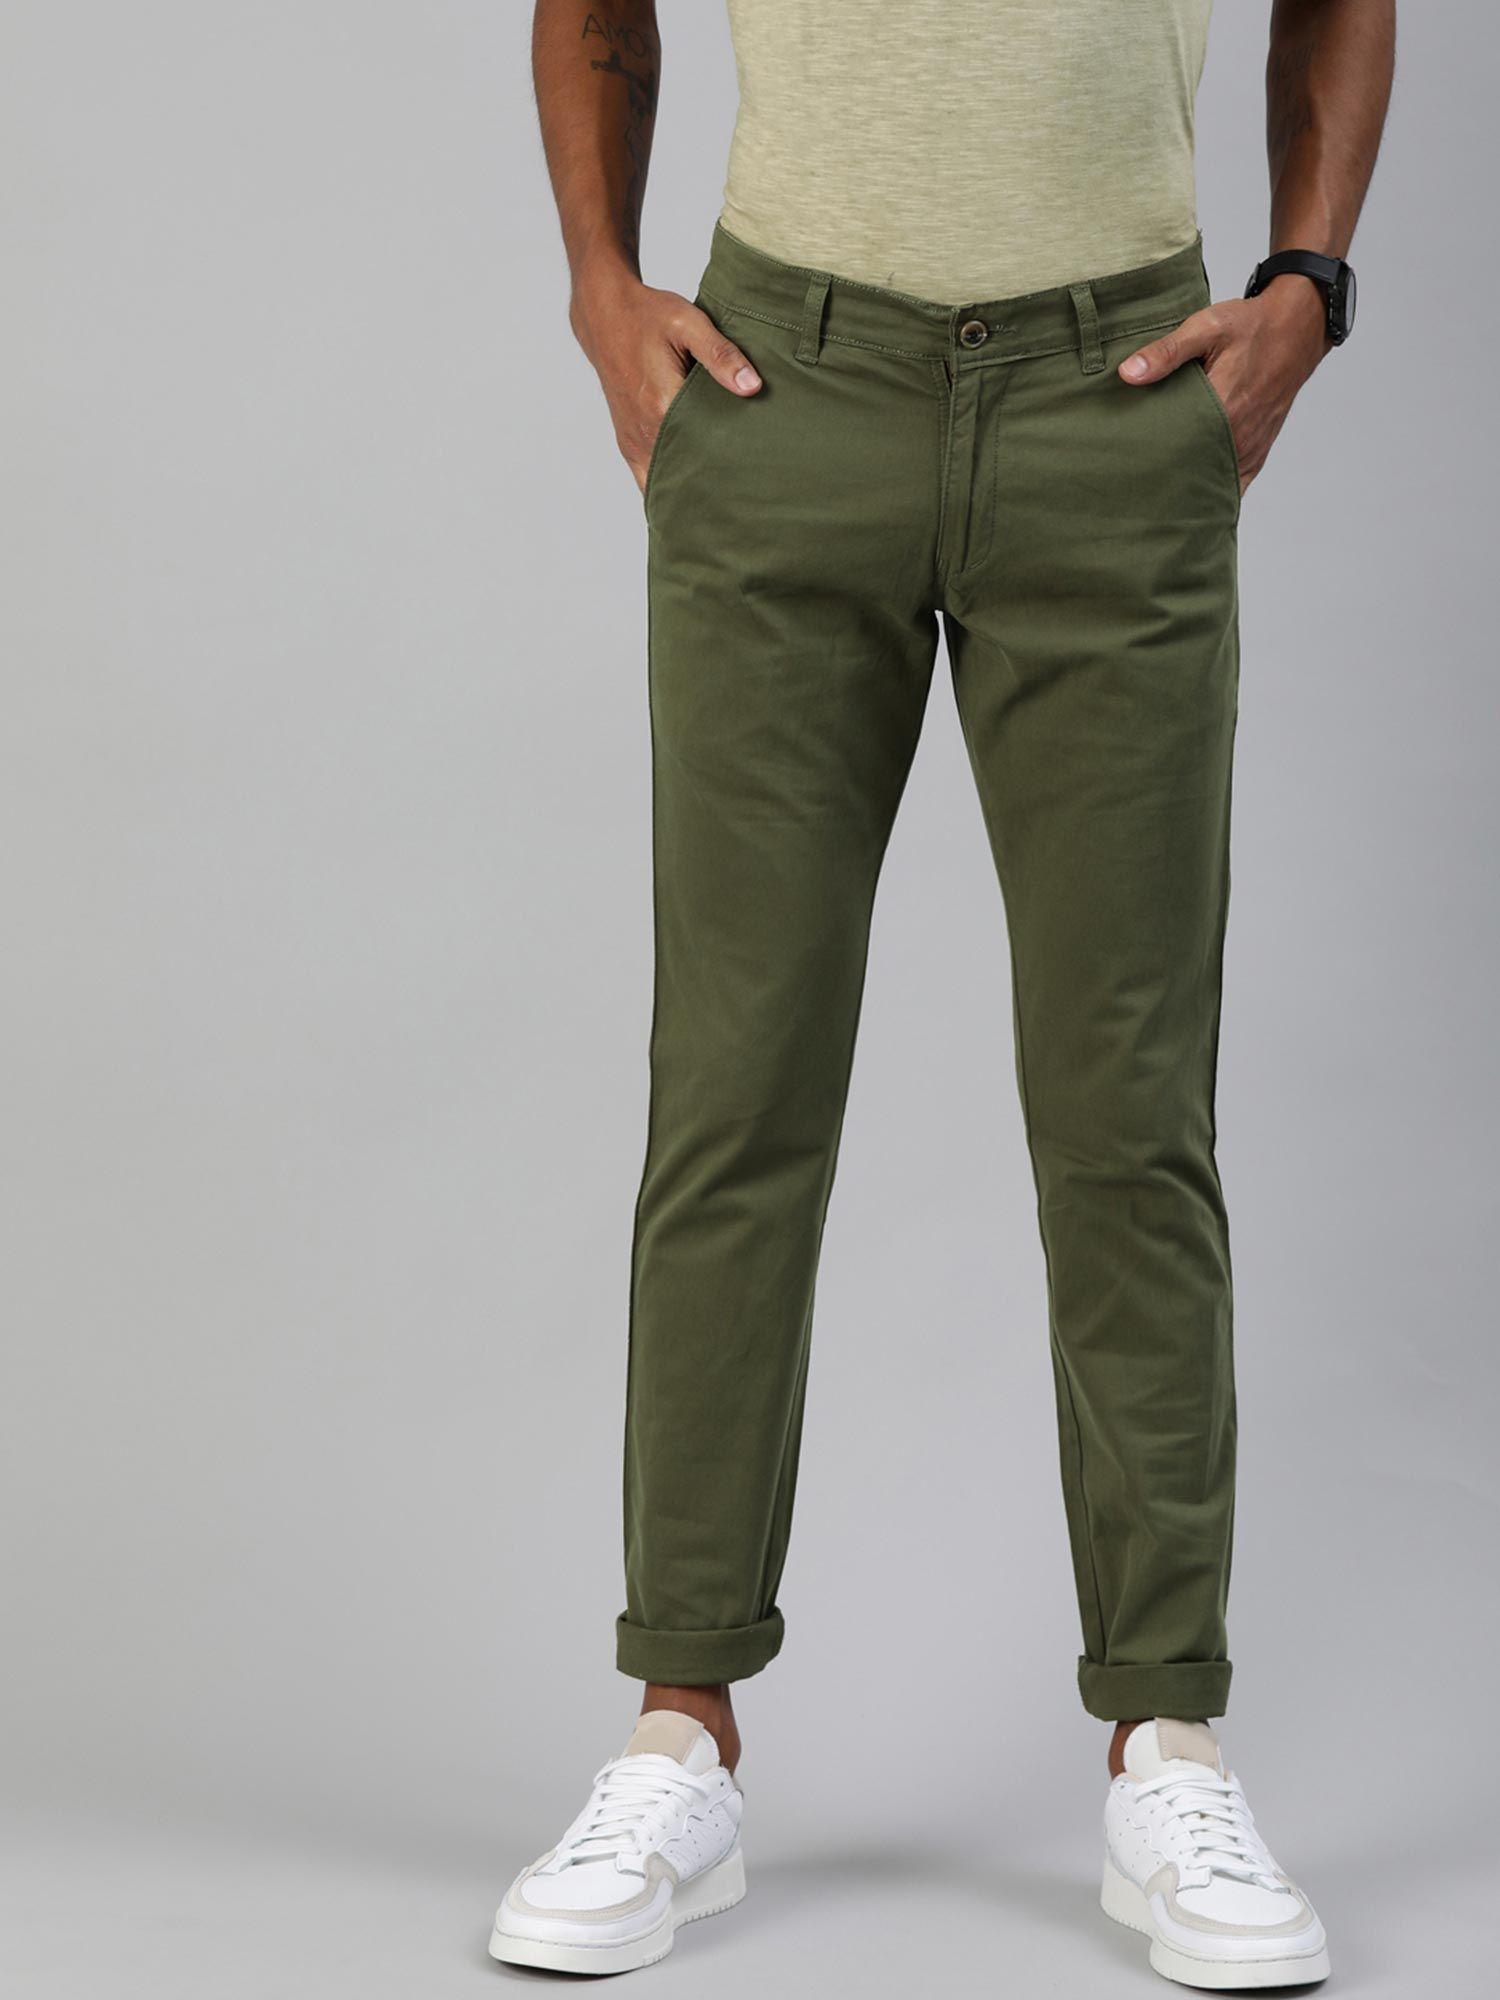 men olive green cotton slim fit casual chinos trousers stretch